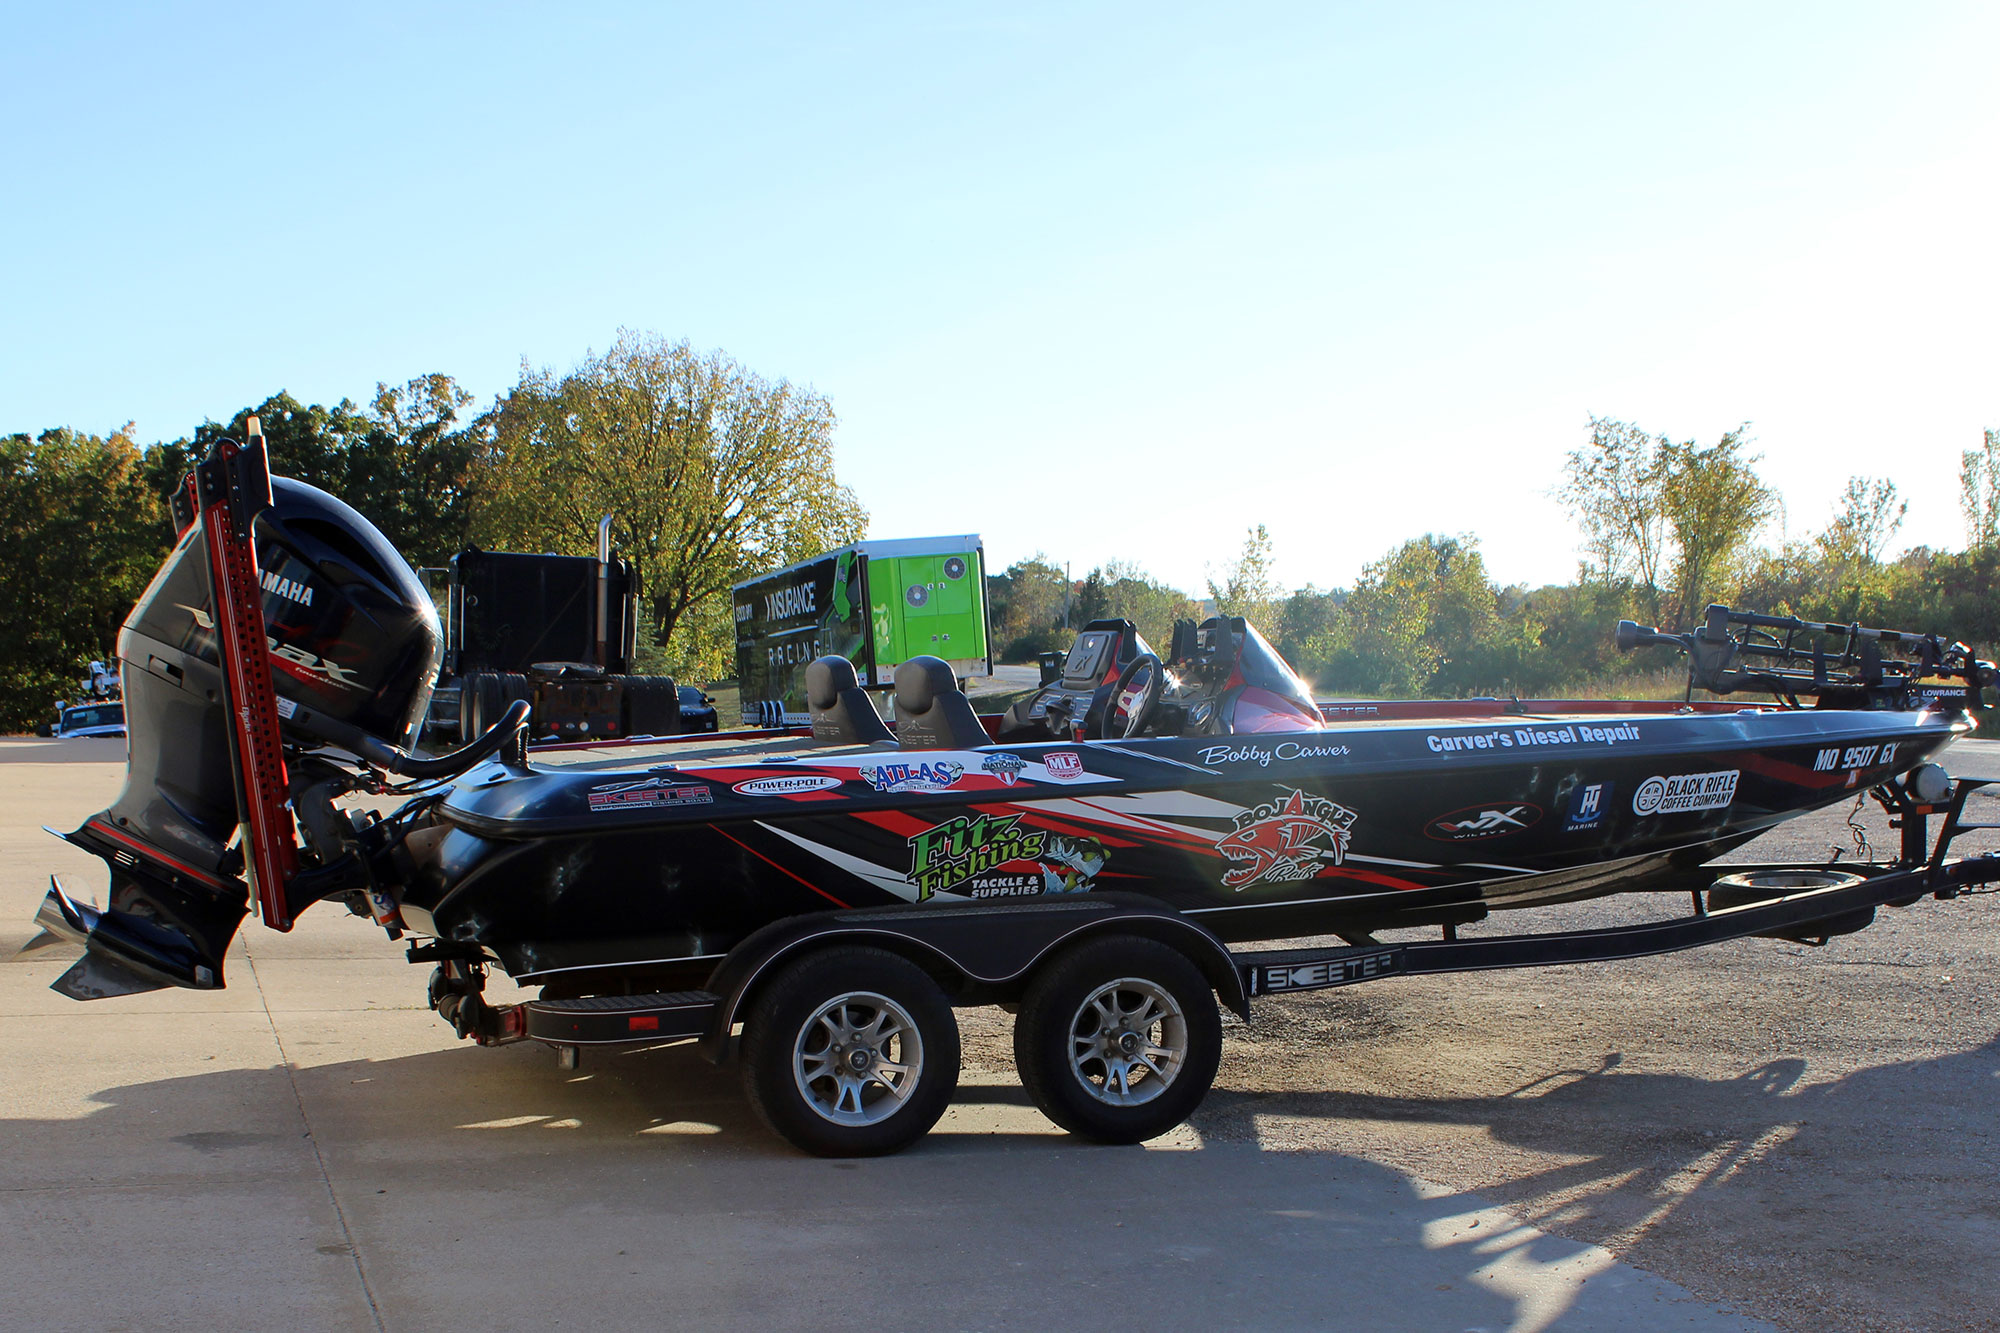 Bobby Carver Boat Wrapping Pro Dezigns Columbia Missouri